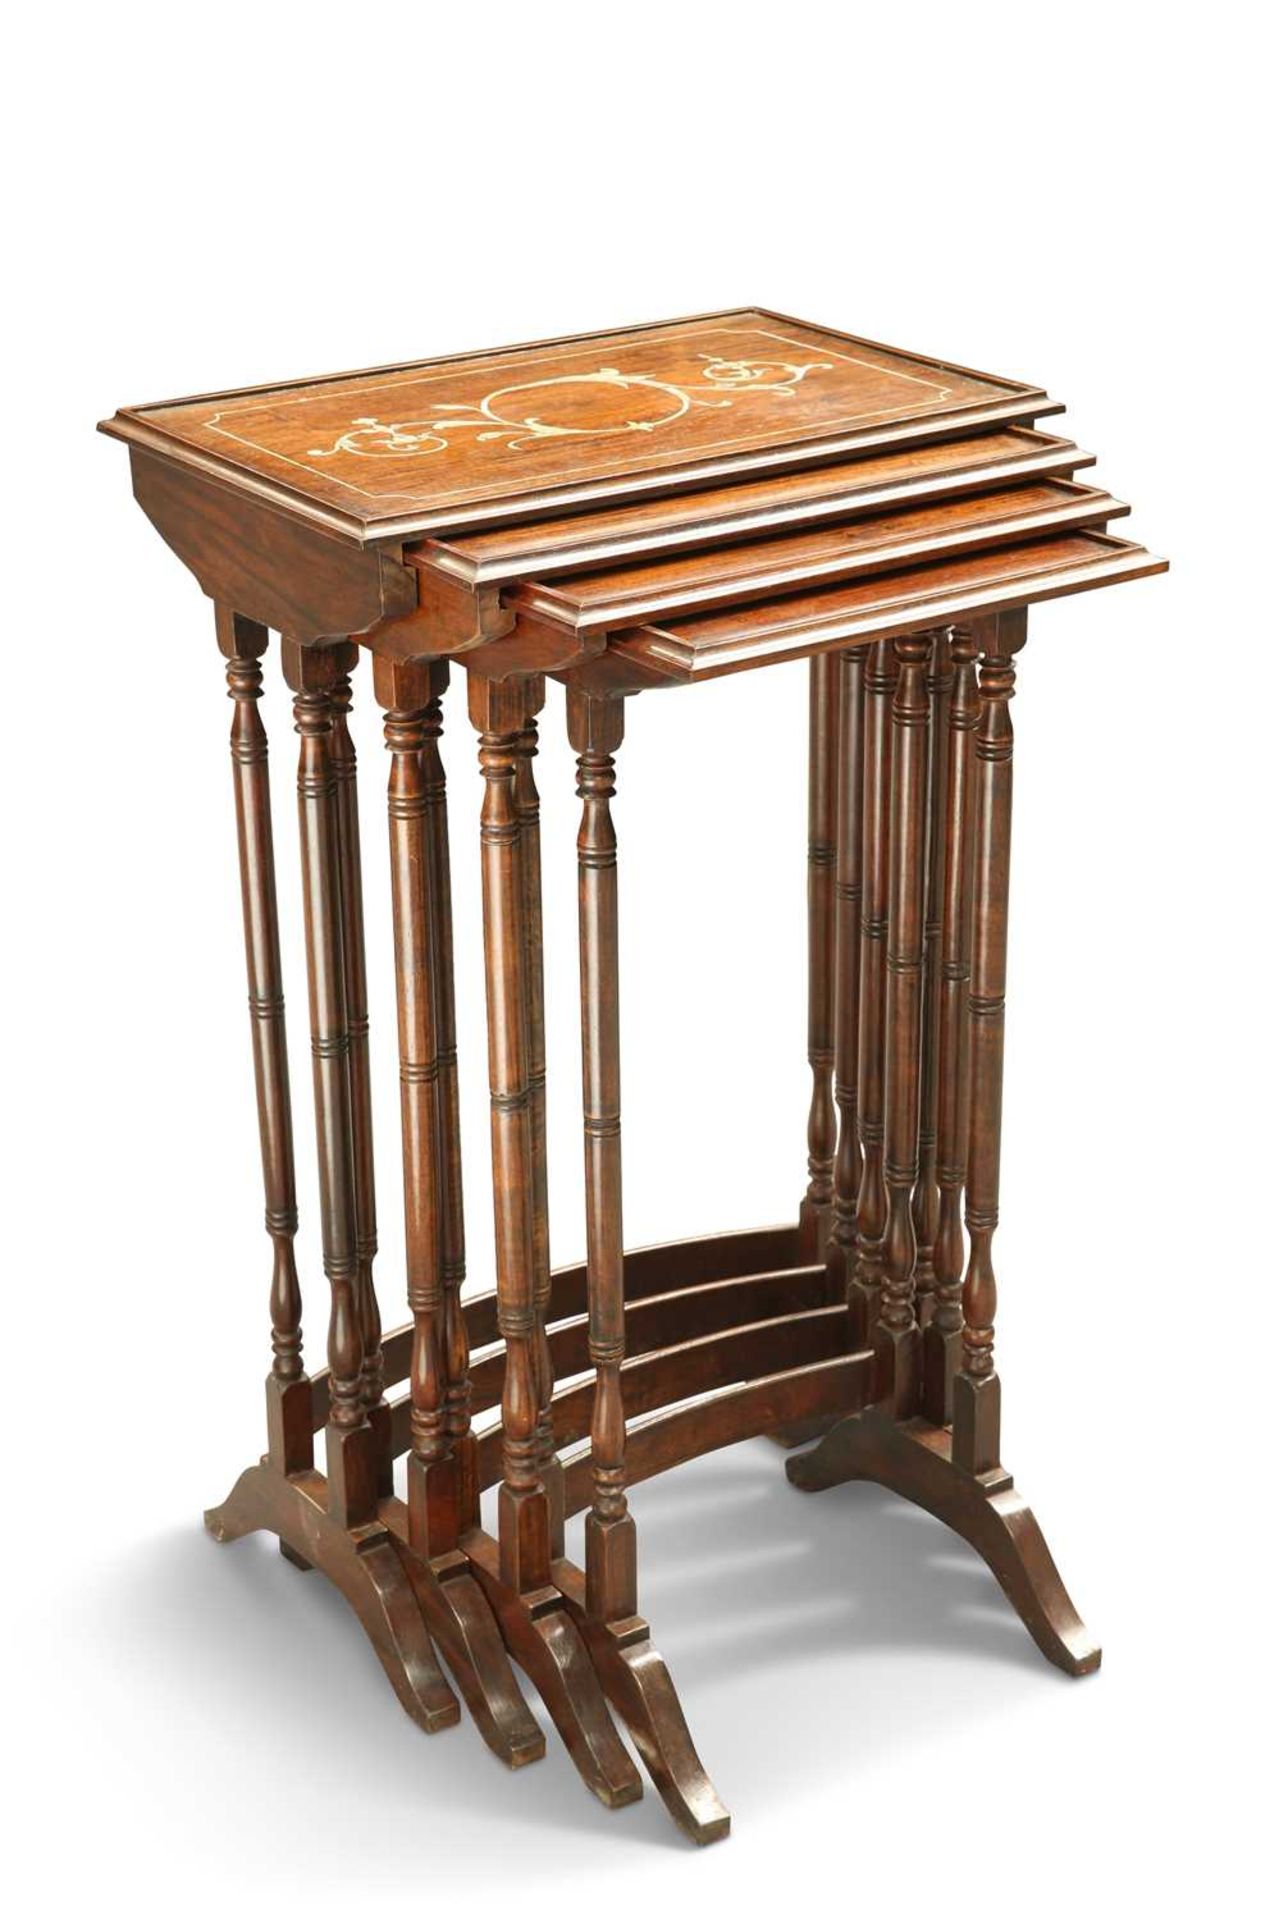 A QUARTETTO OF MOTHER-OF-PEARL INLAID ROSEWOOD NESTING TABLES, CIRCA 1900